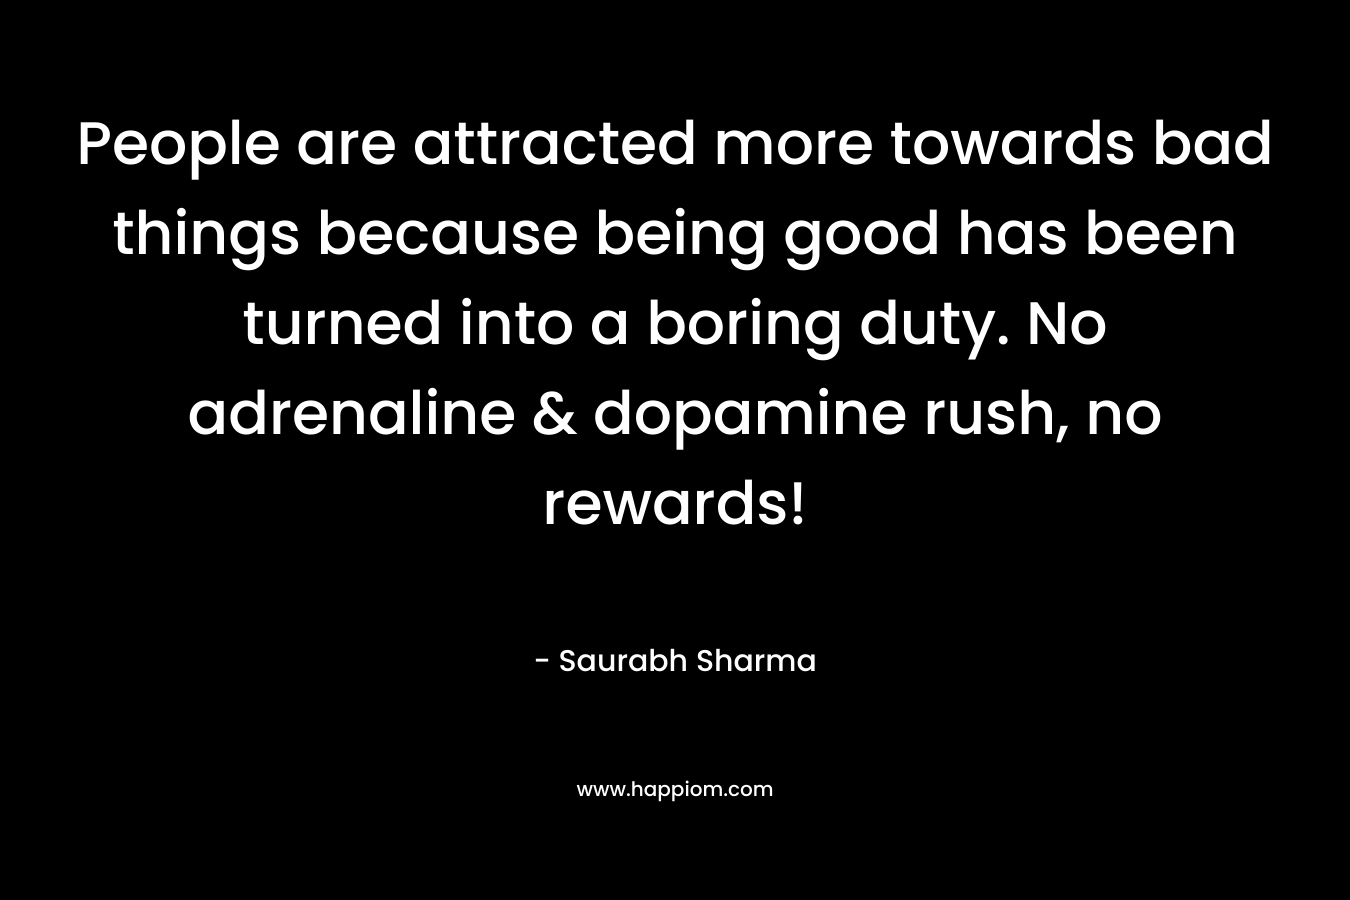 People are attracted more towards bad things because being good has been turned into a boring duty. No adrenaline & dopamine rush, no rewards! – Saurabh Sharma